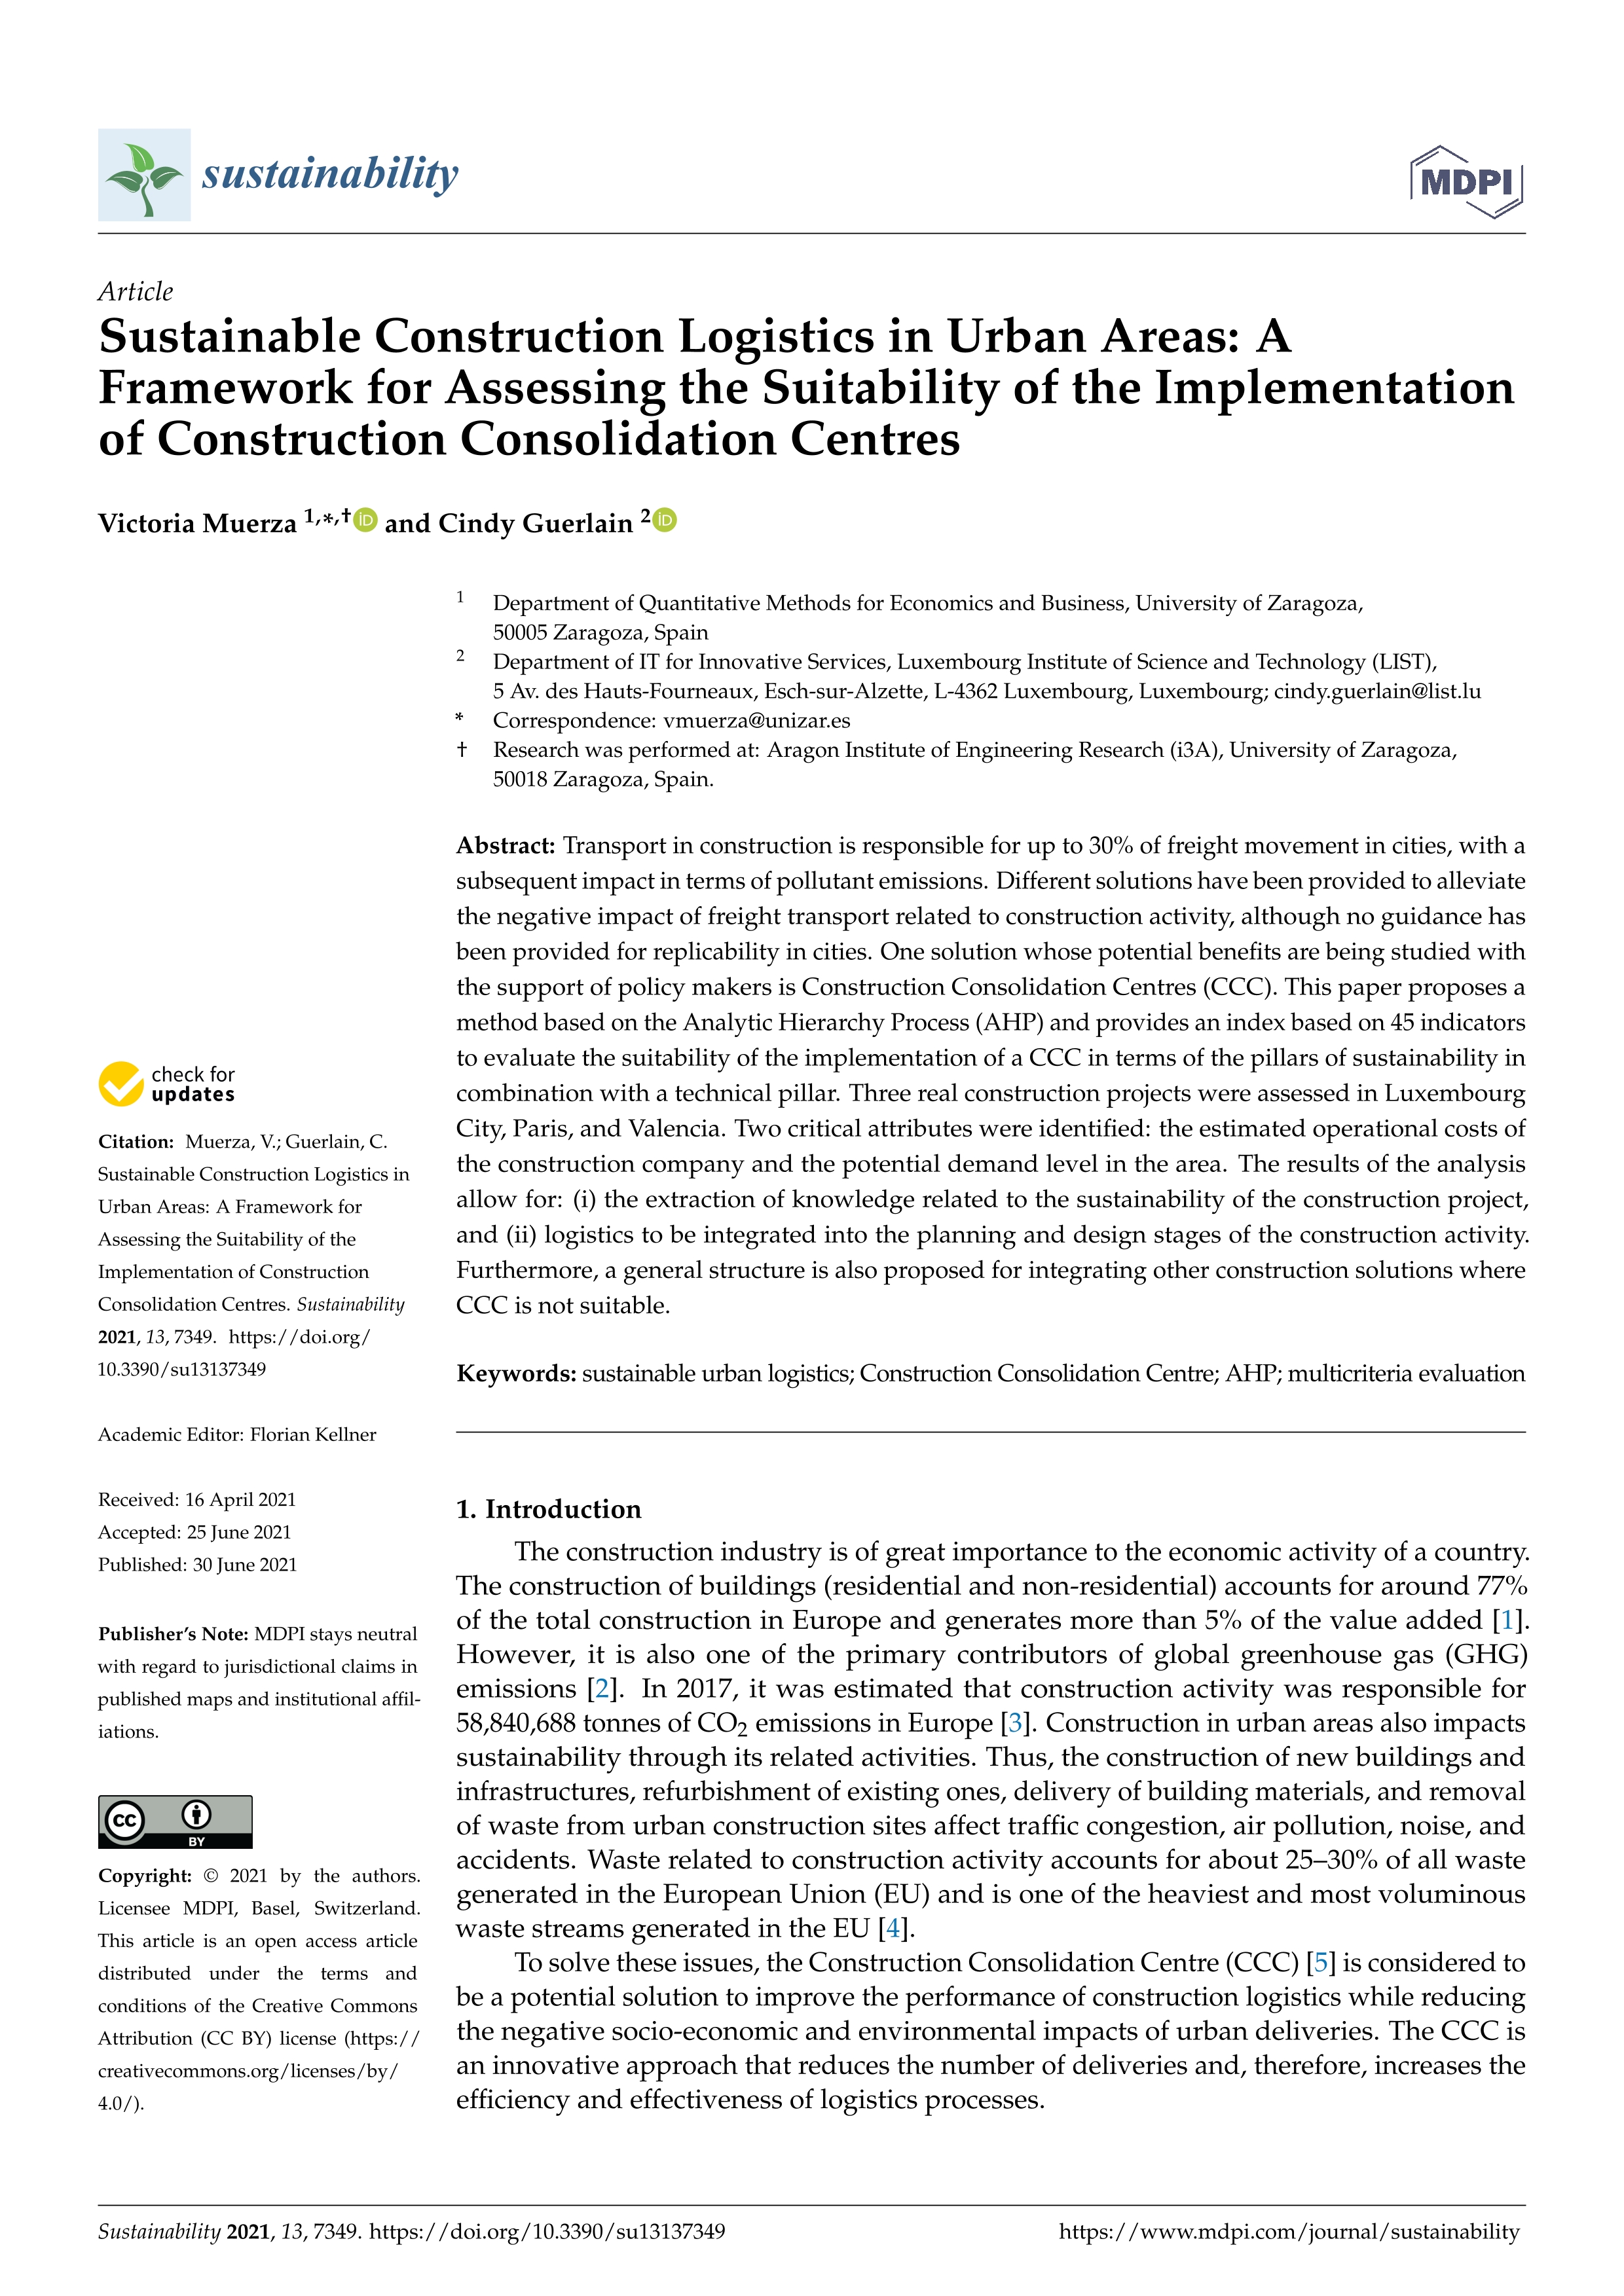 Sustainable construction logistics in urban areas: A framework for assessing the suitability of the implementation of construction consolidation centres